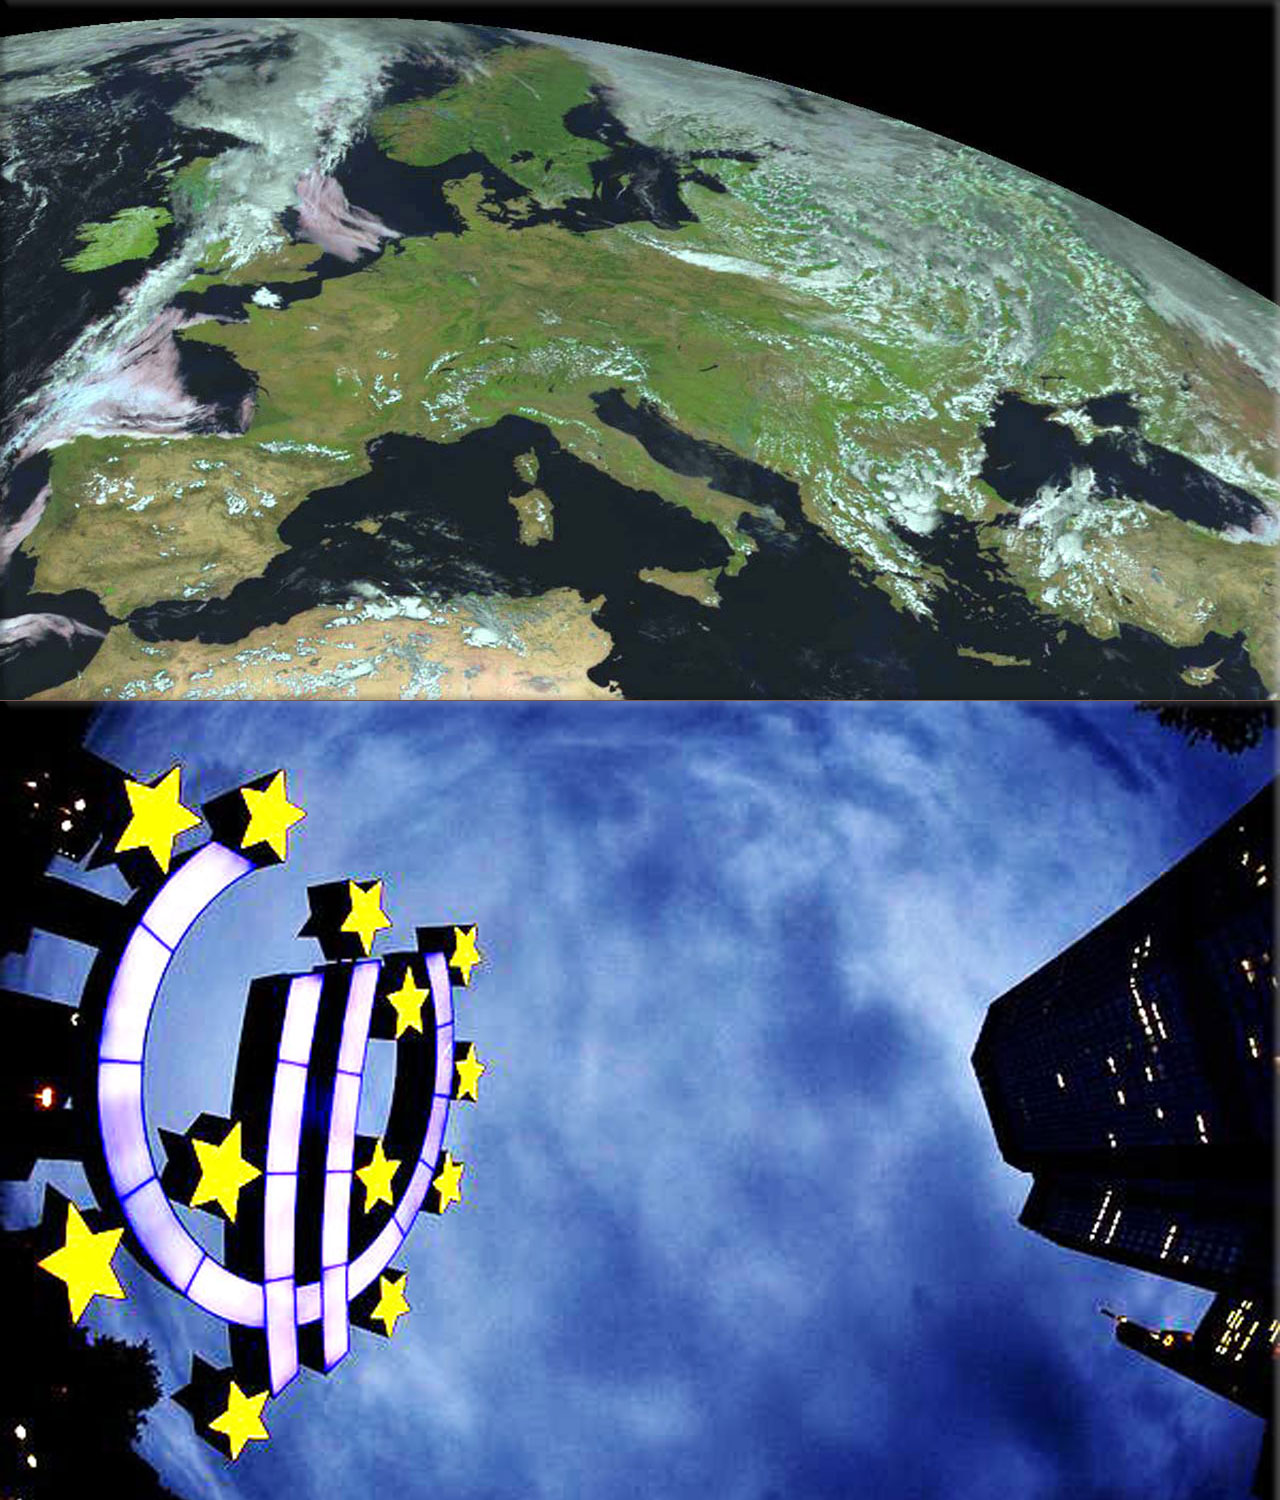 European Union (EU) is a unique economic and political union of 27 member states which are located primarily in Europe